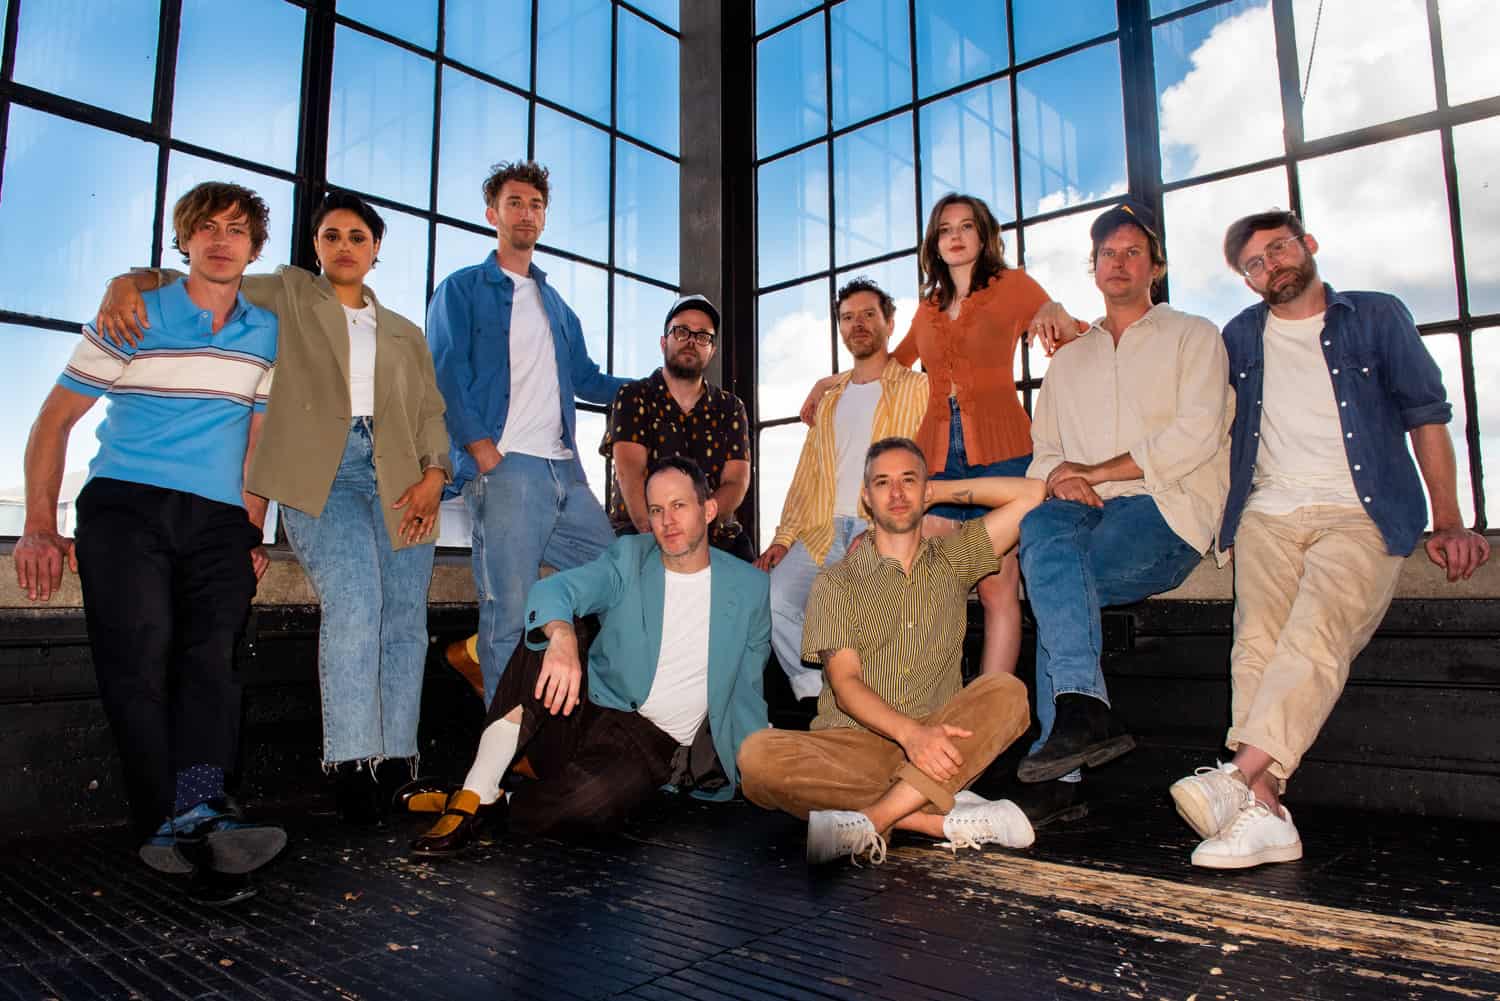 Band portrait with 10 band members in front of large window